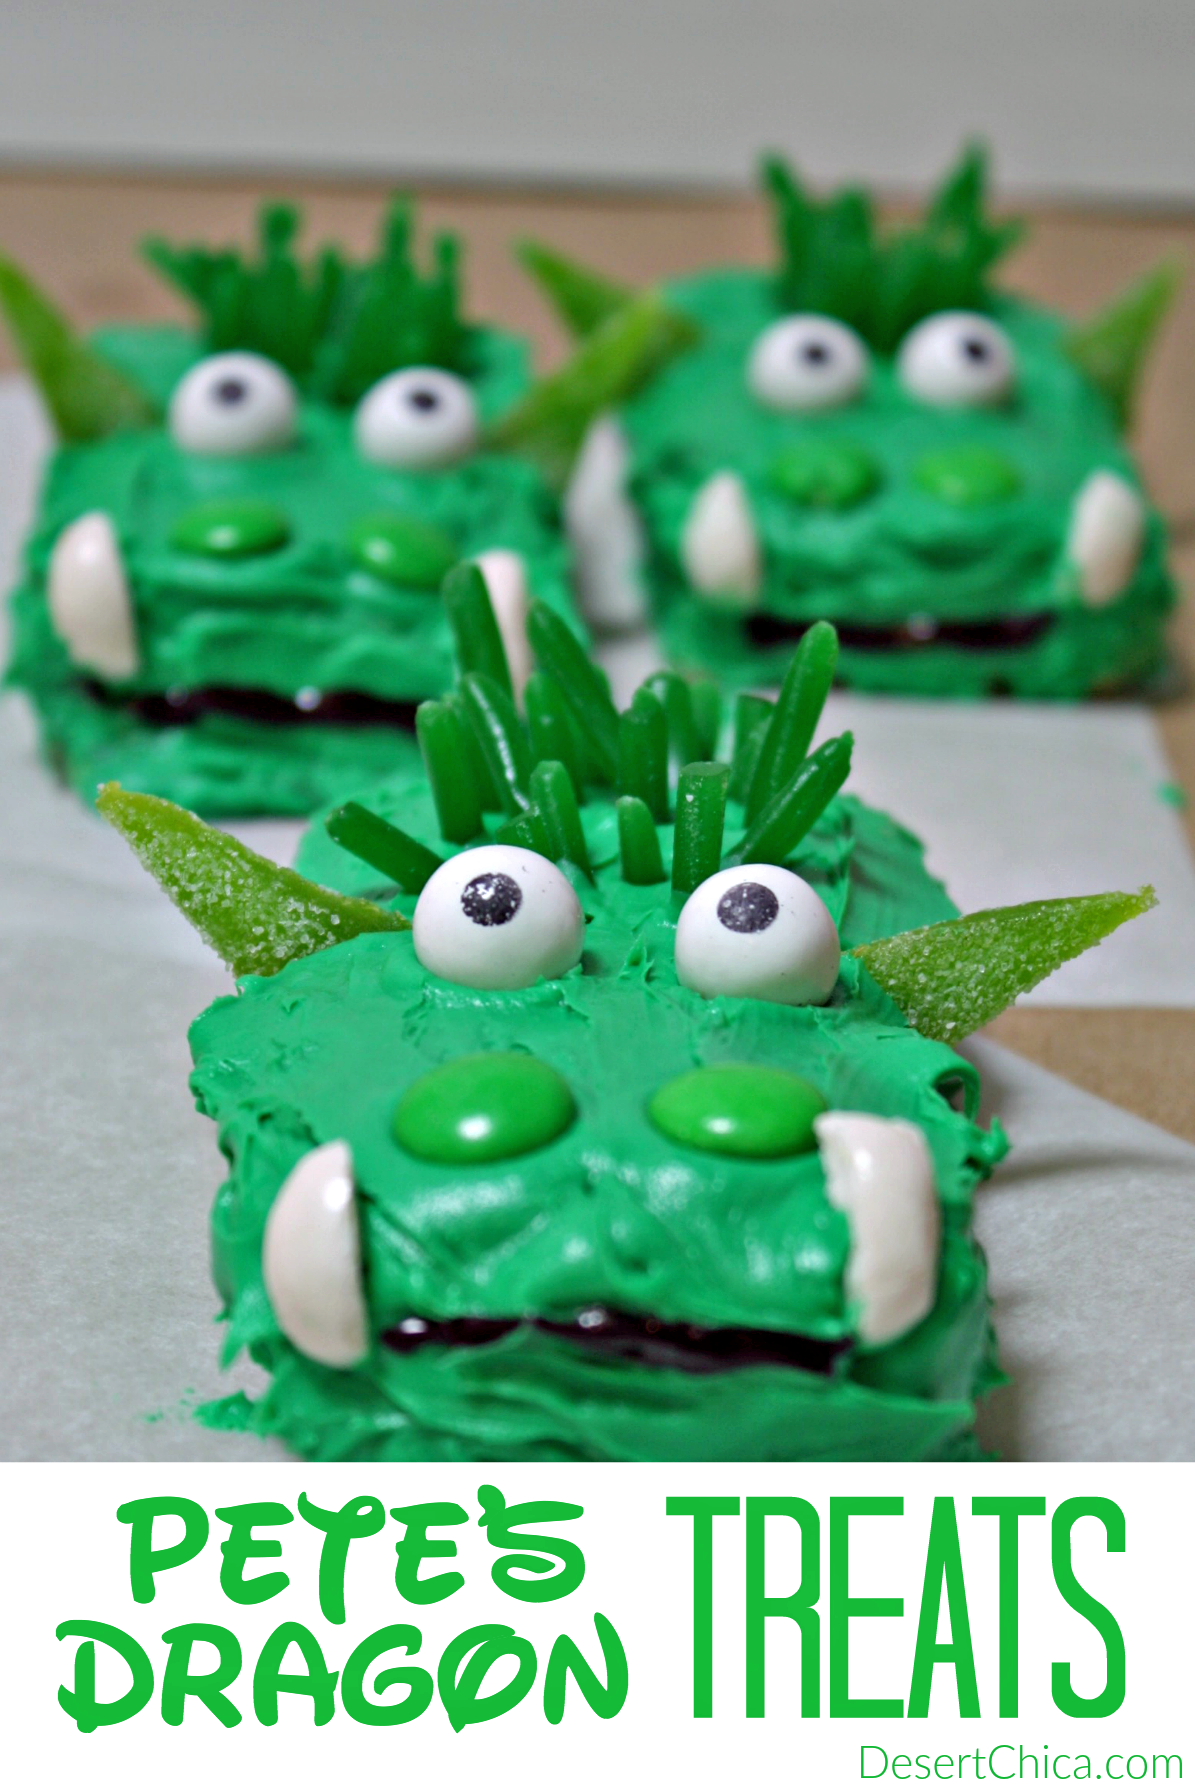 Looking for an easy dragon dessert idea to celebrate Pete's Dragon arriving in theaters? These no-bake Pete's Dragon Treats are super fun and yummy!